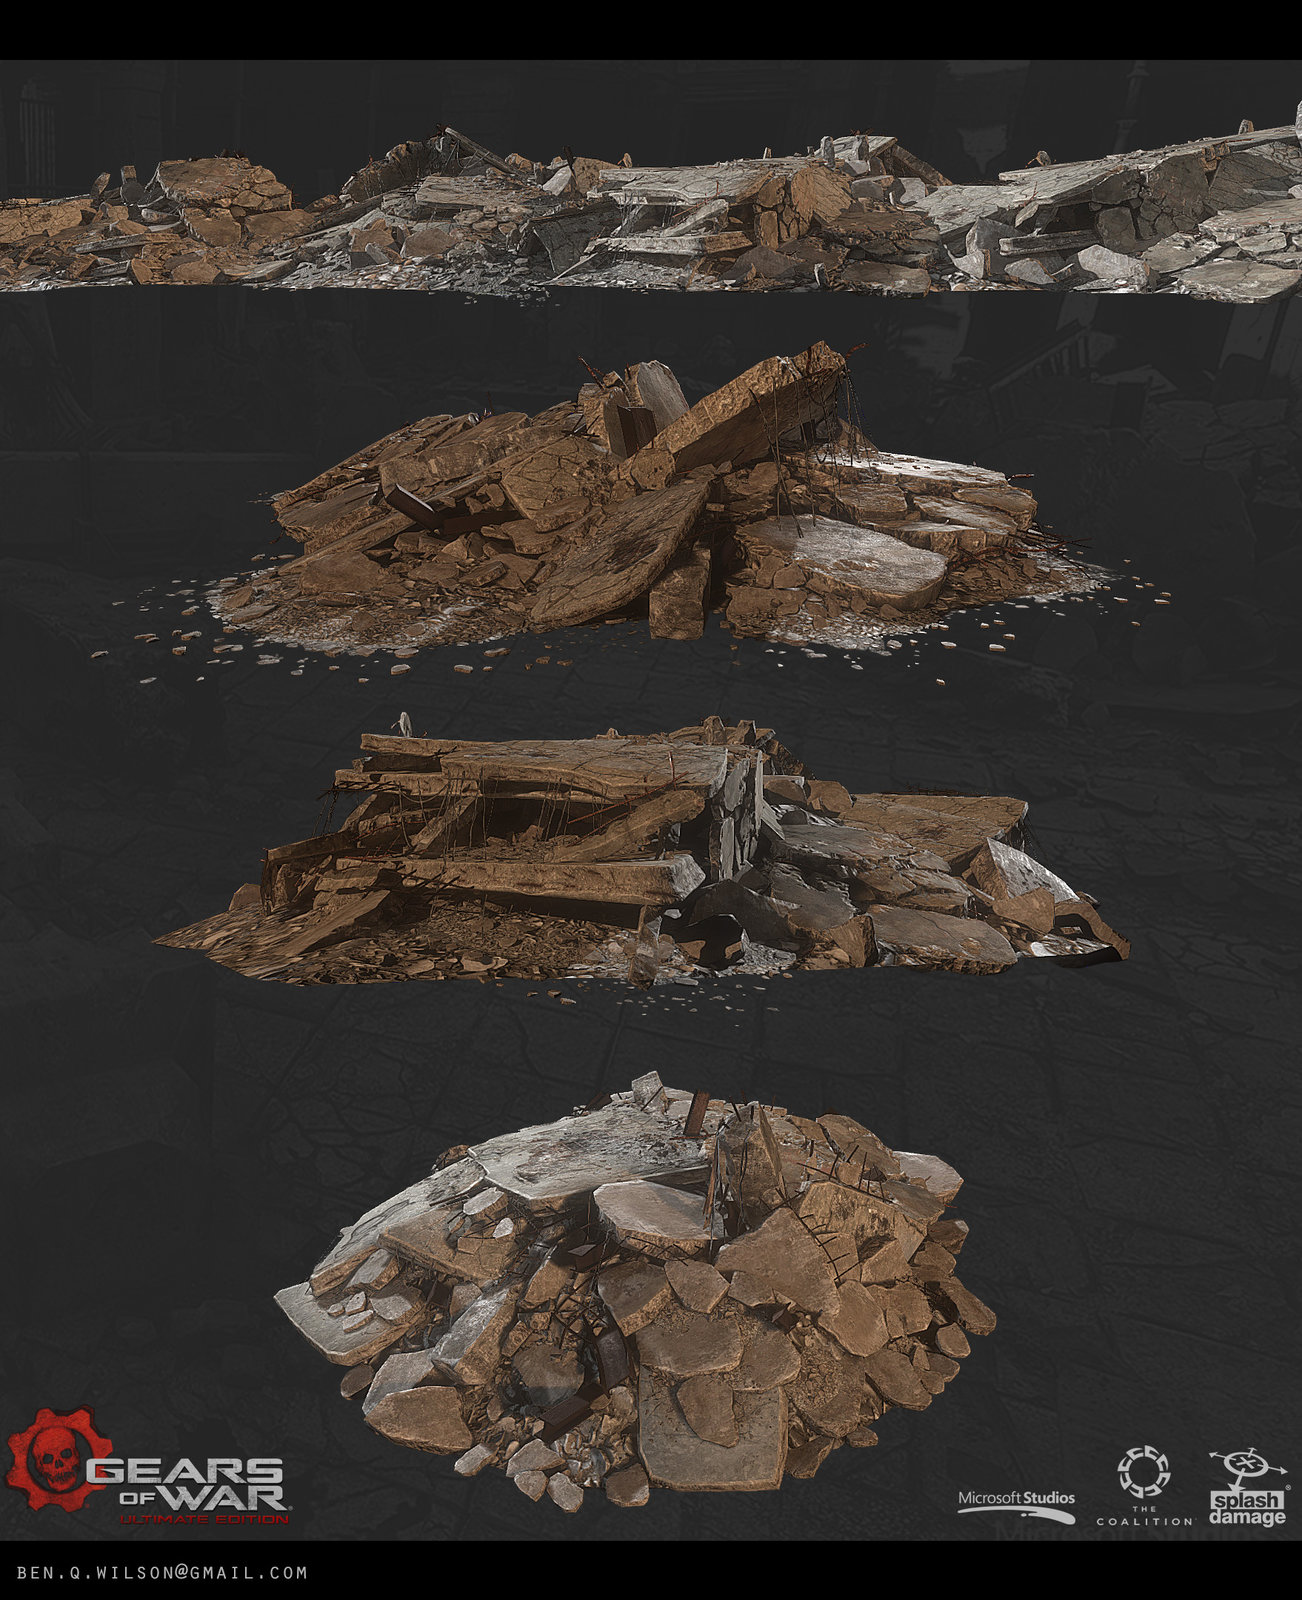 Some examples from the collection of rubble meshes created. The assets ranged from small loose rubble to full scale collapsed buildings.